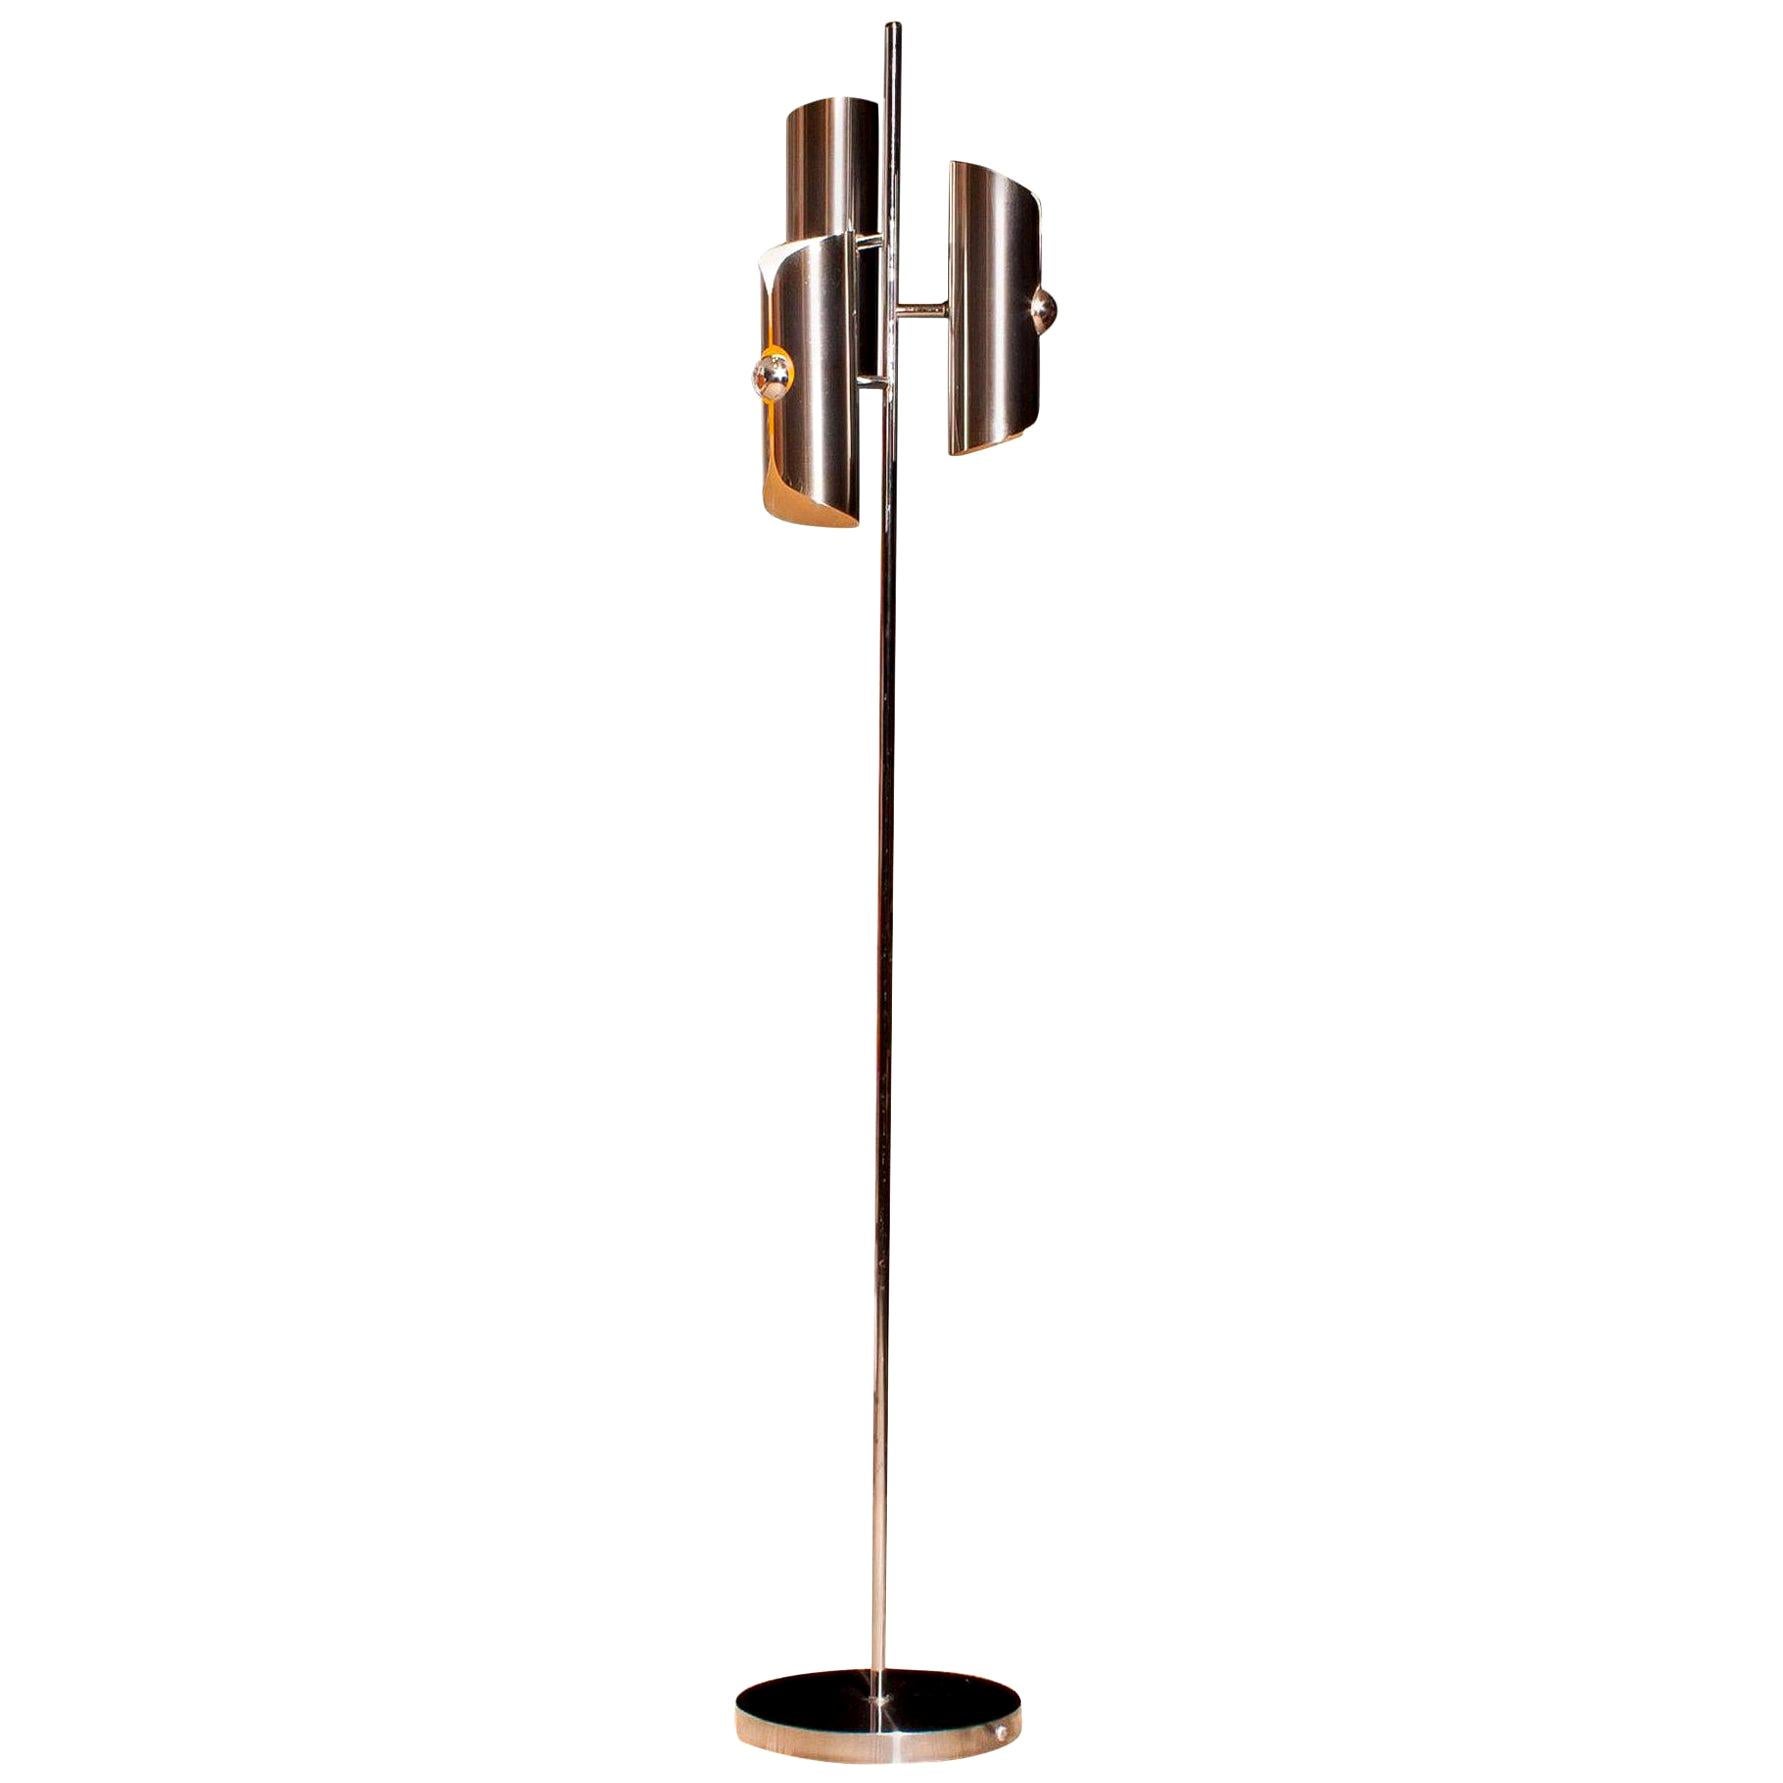 Beautiful 1970 Italian floor lamp in chrome and steel combined with a total height of 160 cm.
The shades are fixed and made of brushed steel.
The shades are height 28 cm. and ø 9 cm.
Inside the shades are white lacquered and in the middle part is